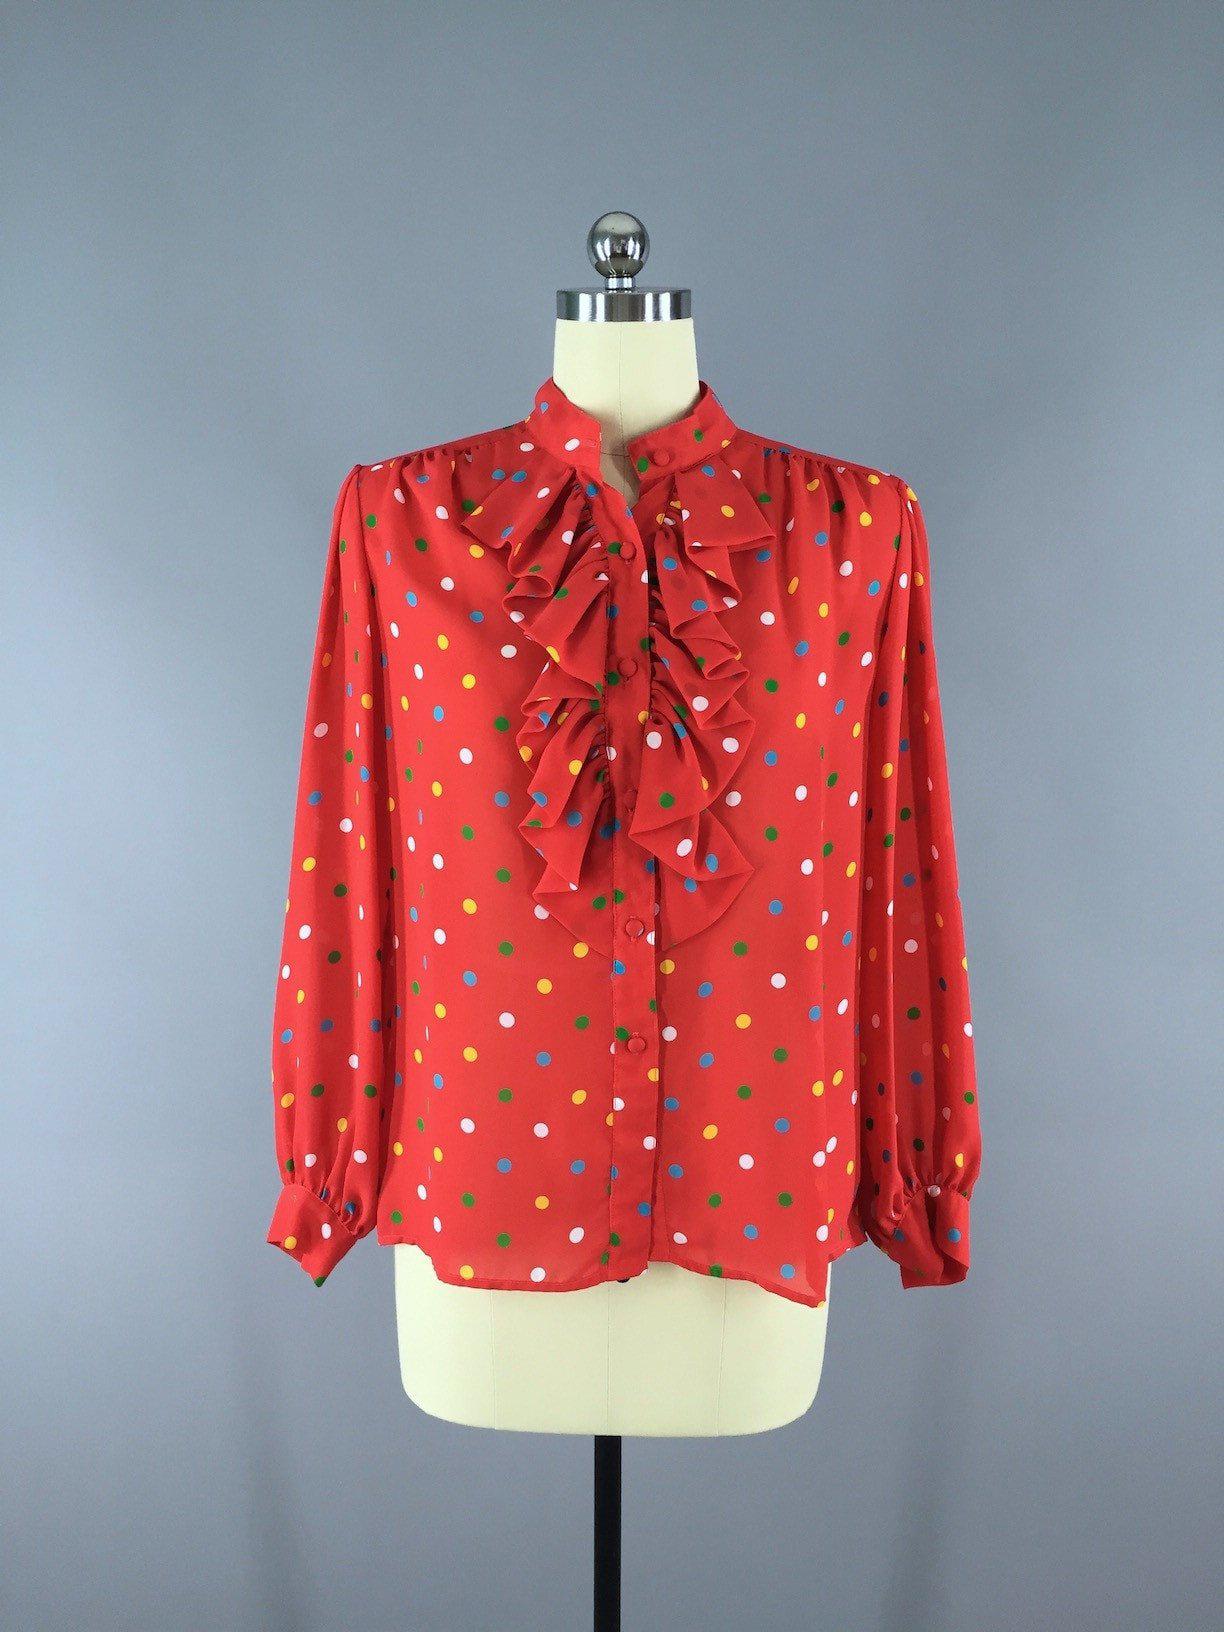 Vintage 1980s Blouse with Red Polka Dots - ThisBlueBird